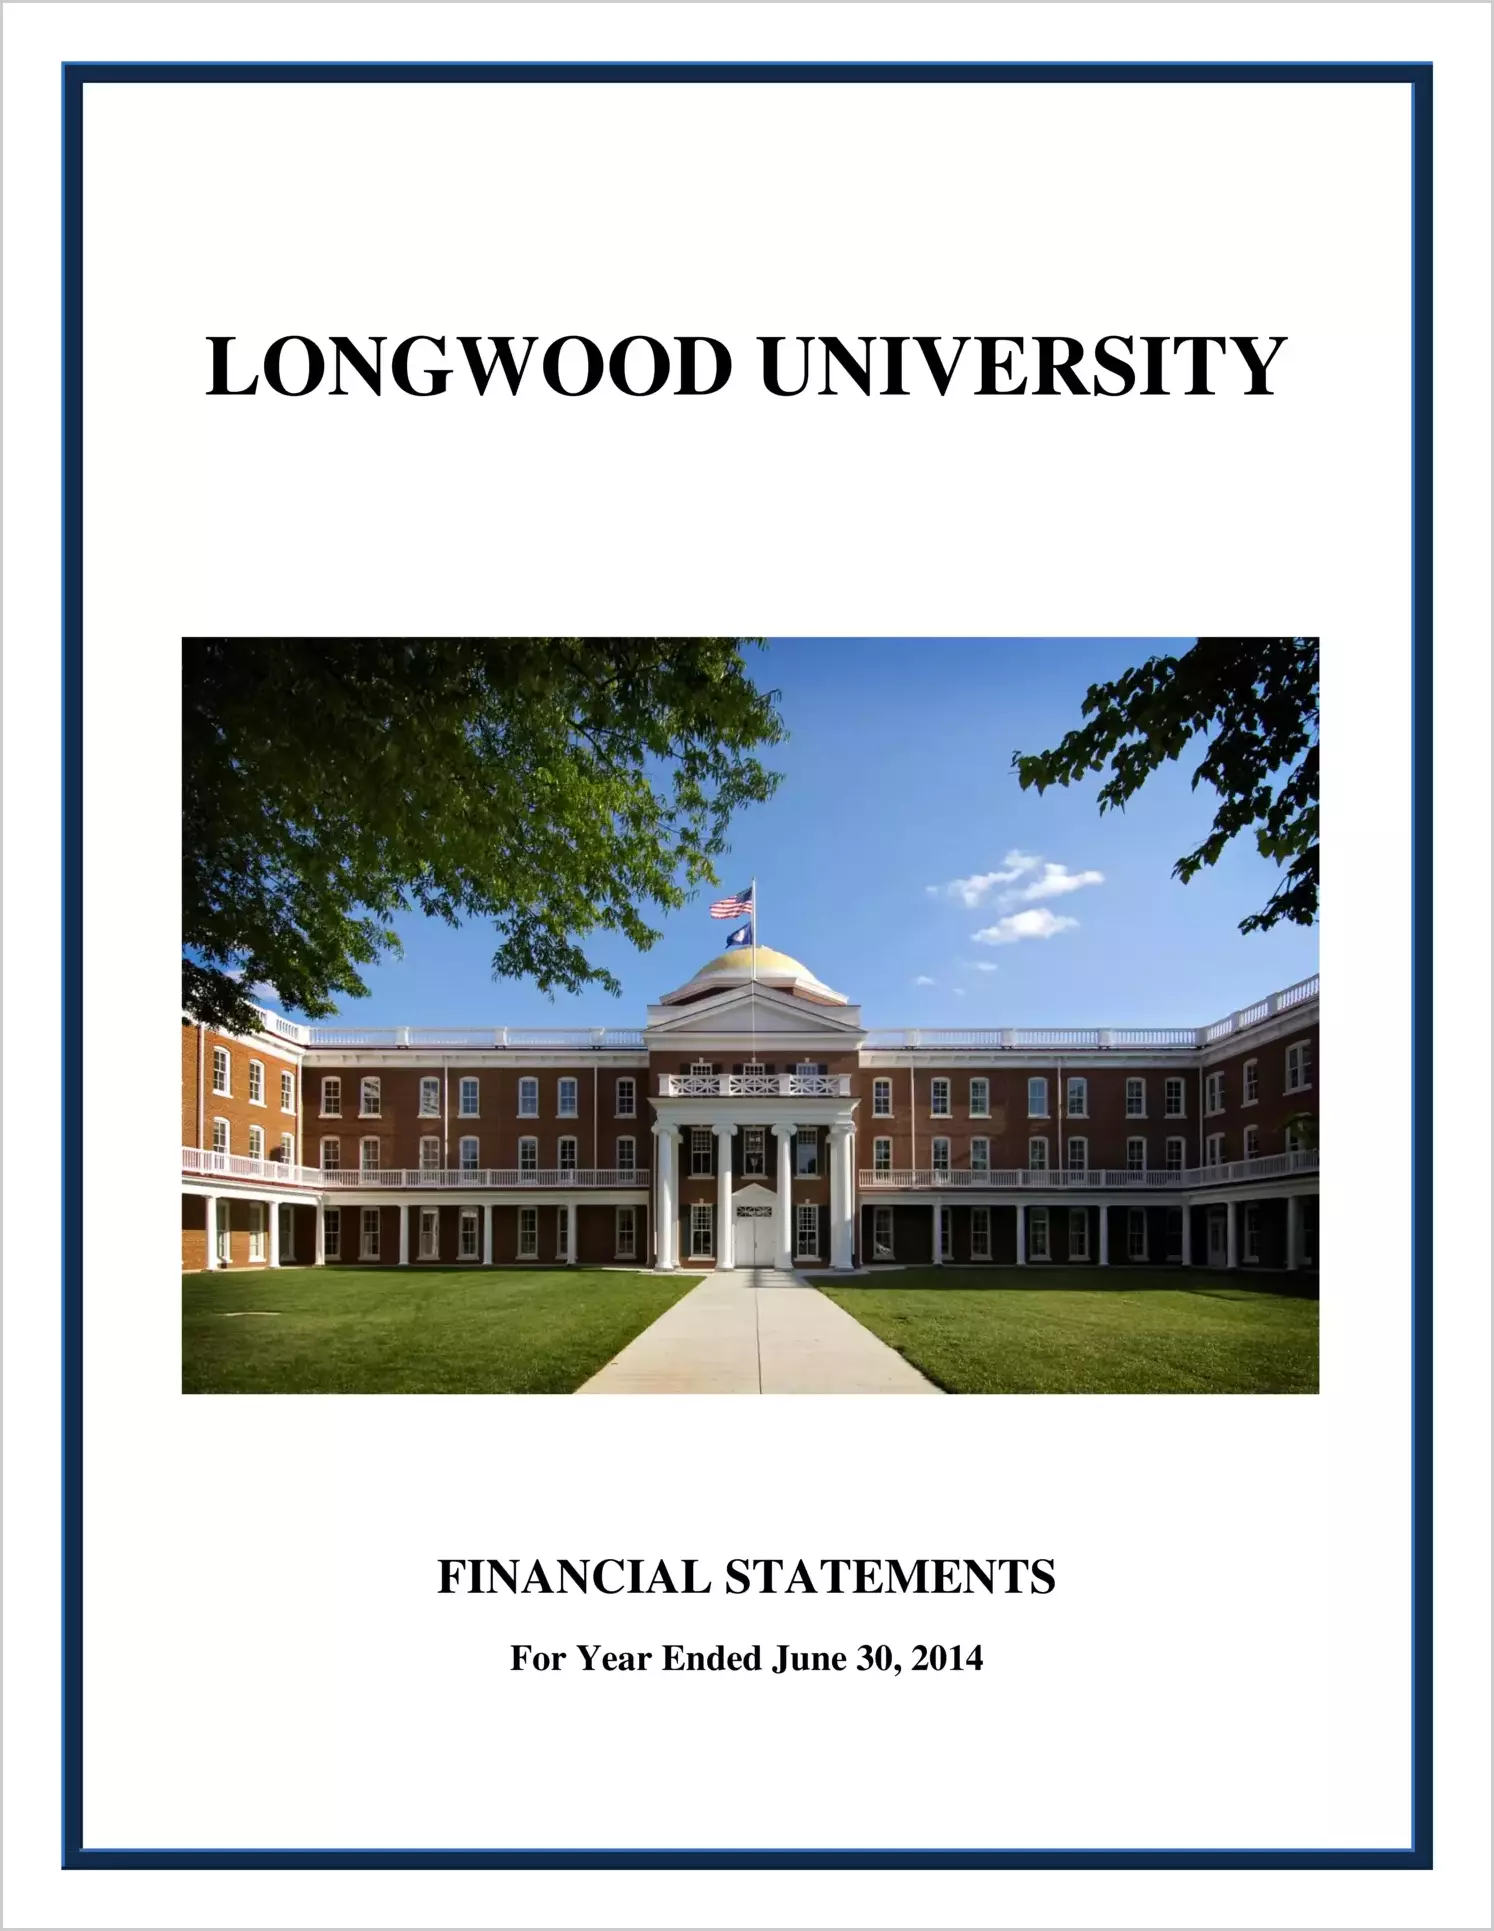 Longwood University Financial Statement report for the year ended June 30, 2014